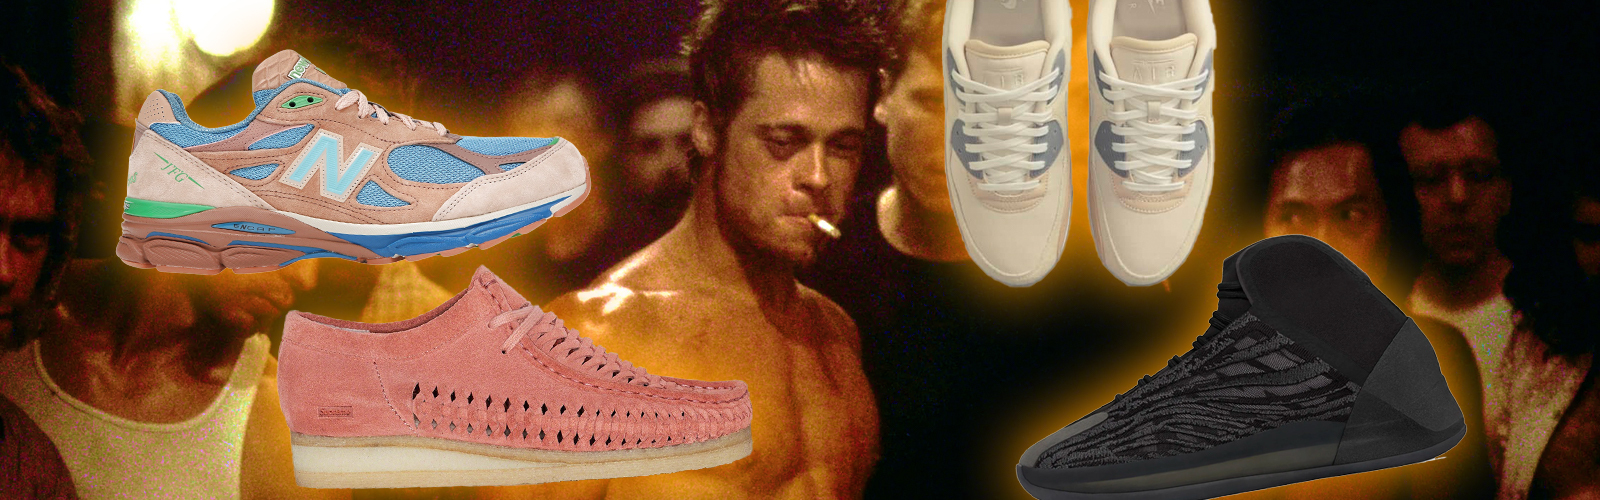 Where To Buy Yeezy QNTM Onyx, The Adidas Campus '80 Fight Club, & More